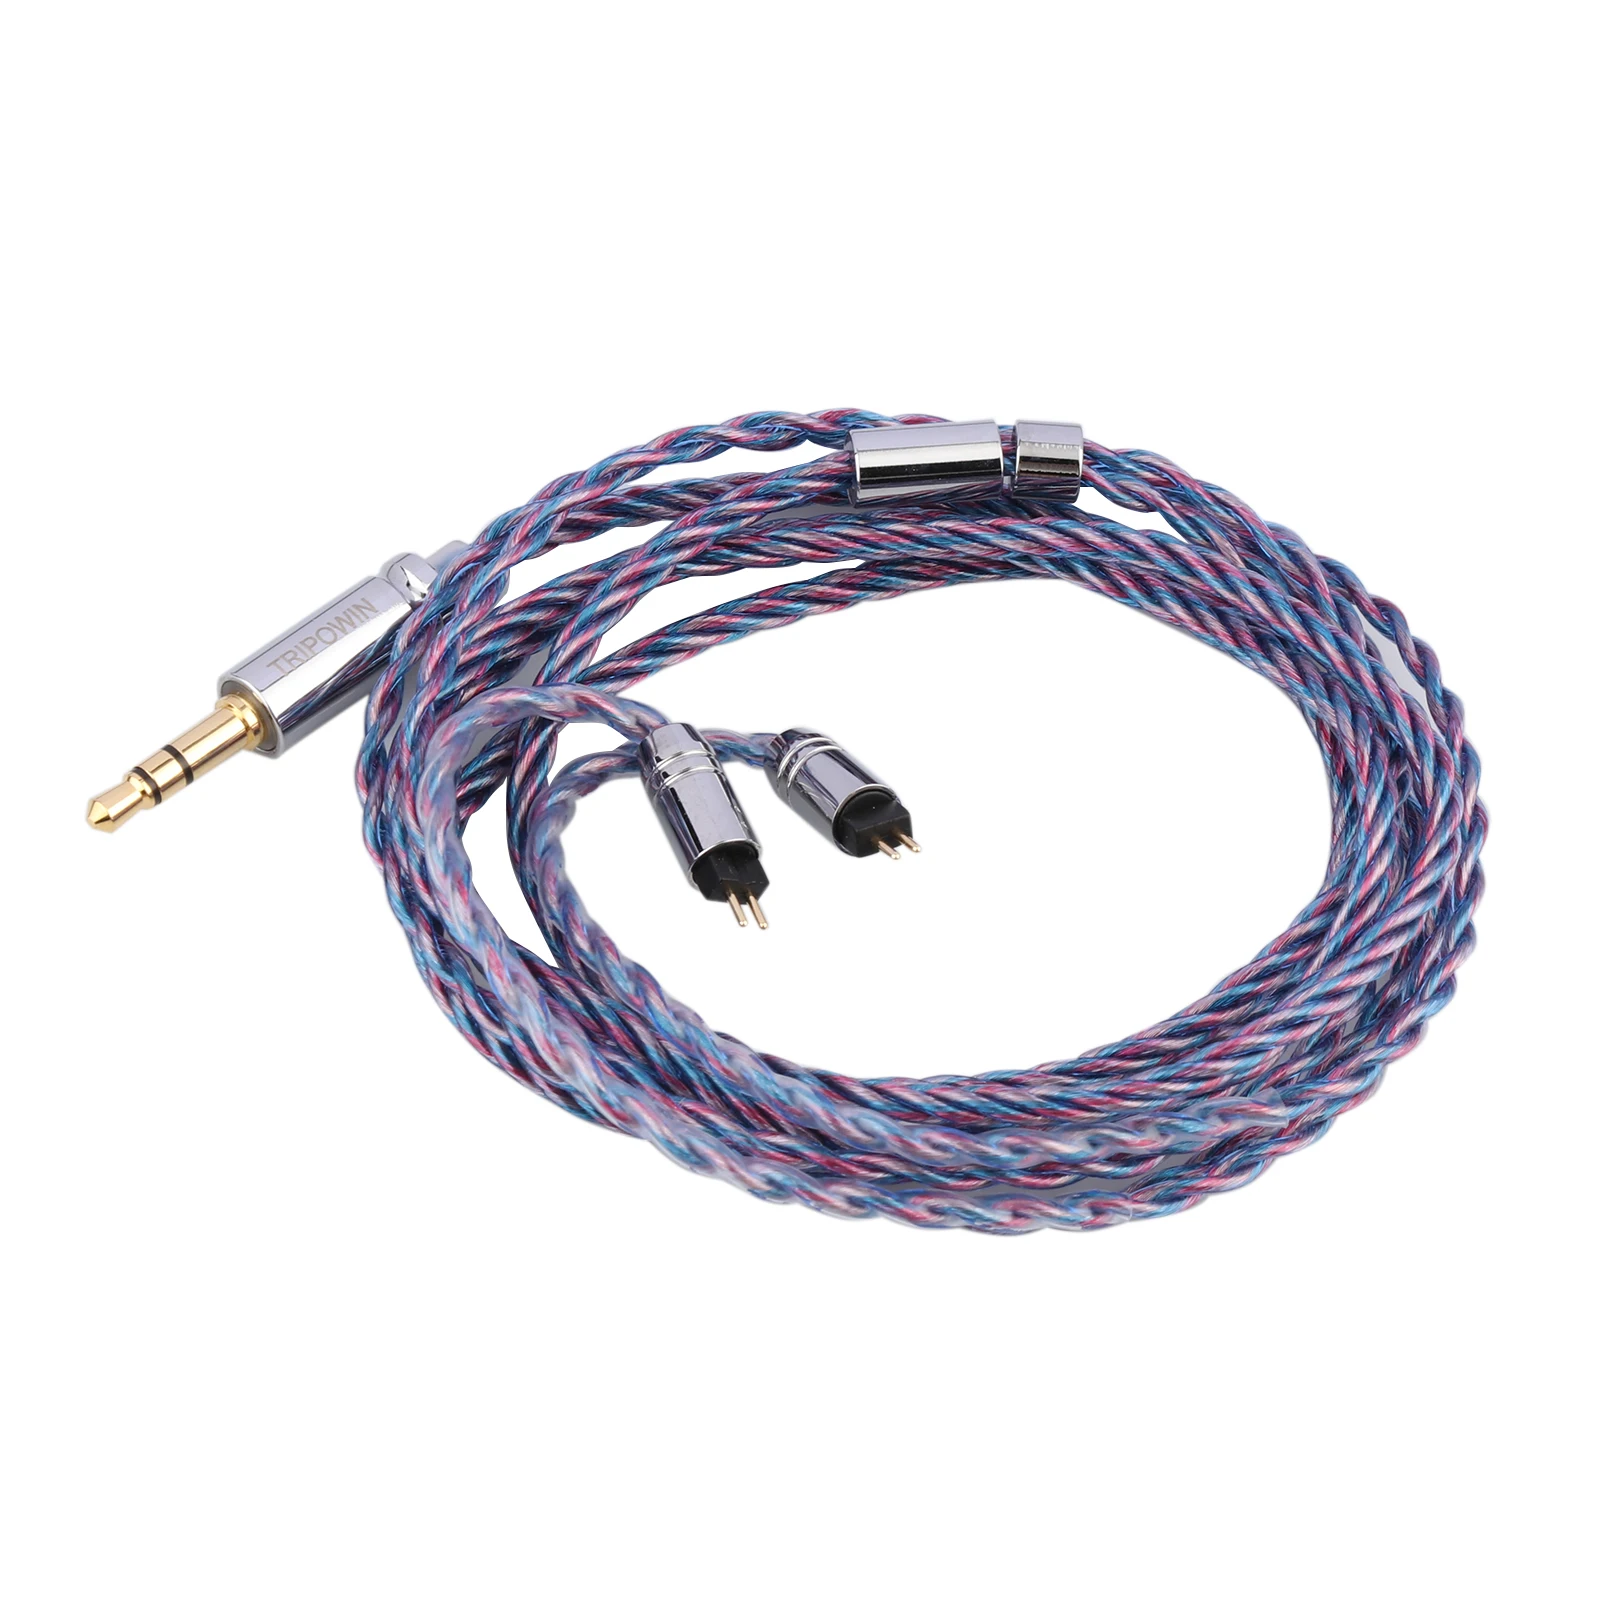 

Tripowin Sirene 4 Cores IEM Cable 24AWG OFC Replacement Cable 32 Wires Per Core with PVC Cover for In Ear Monitor Audiophile